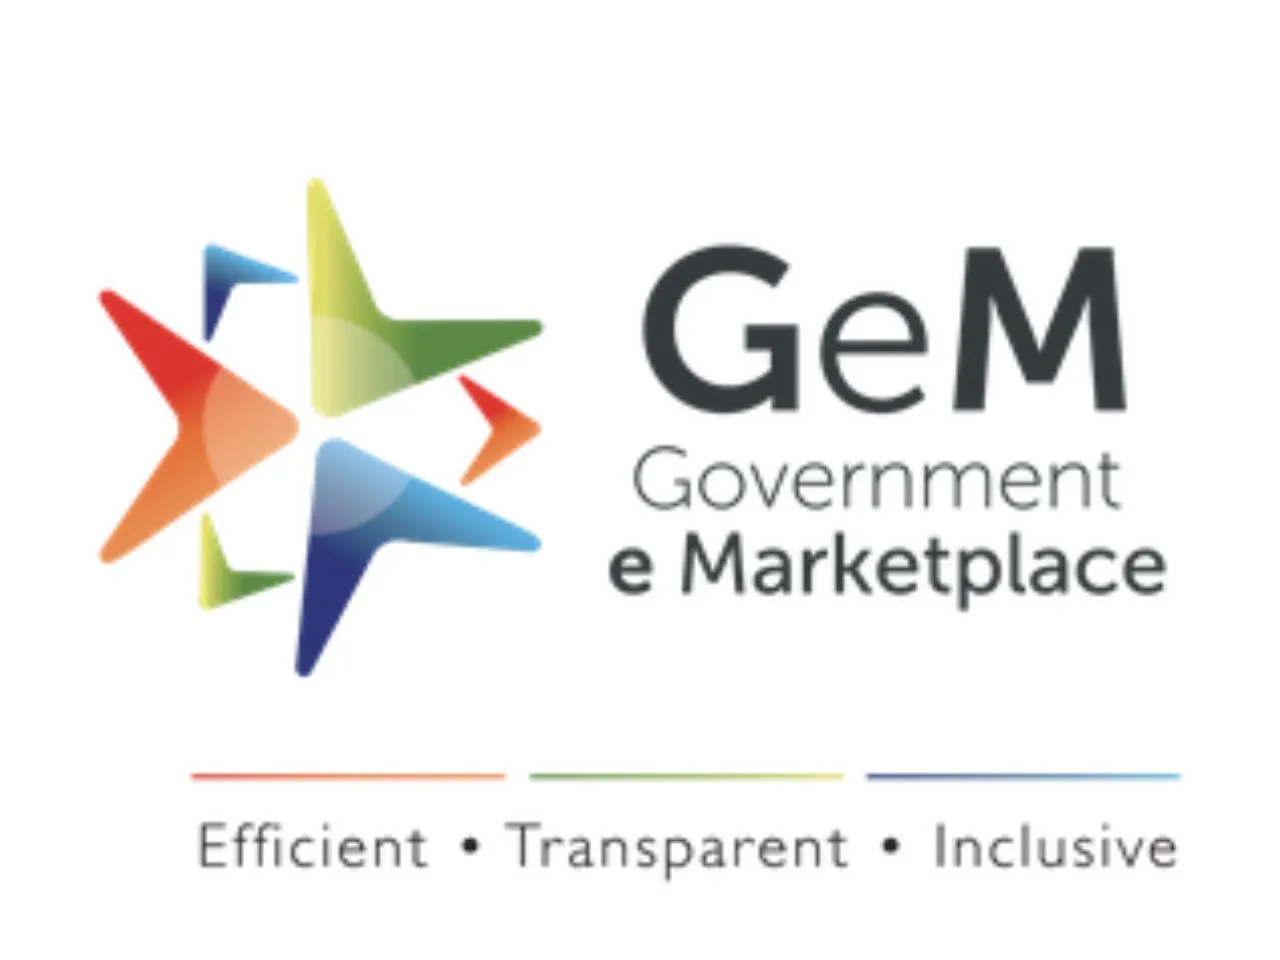 GeM Is Placed To Exceed Its Ambitious Target of ₹ 1.75 Lakh Cr